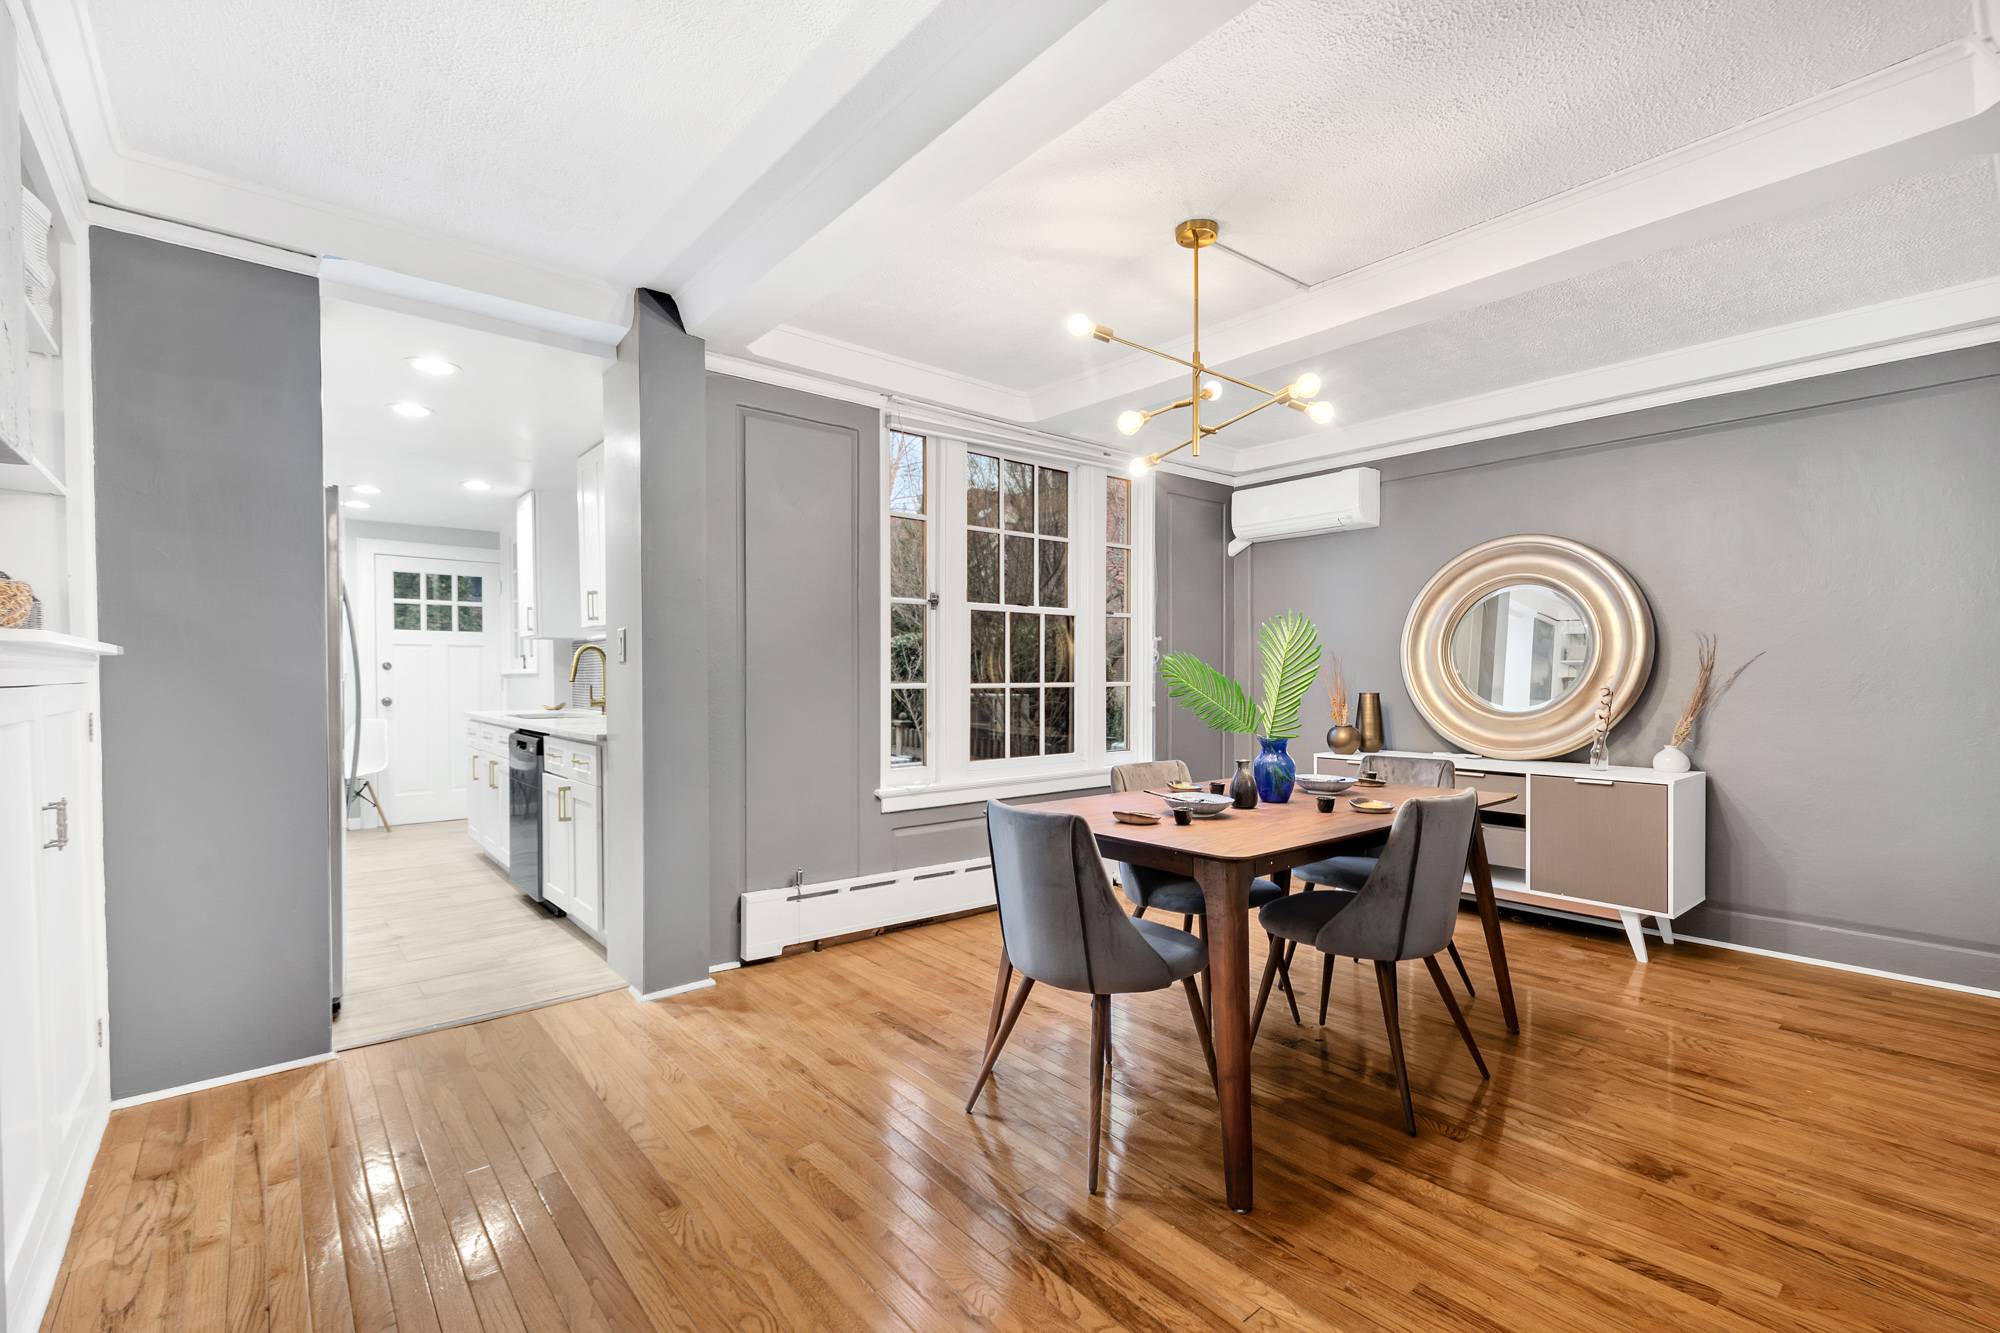 Discover this newly renovated four bedroom two and a half bathroom Tudor townhouse, nestled on a tree lined block in the private community of Forest Hills Gardens.